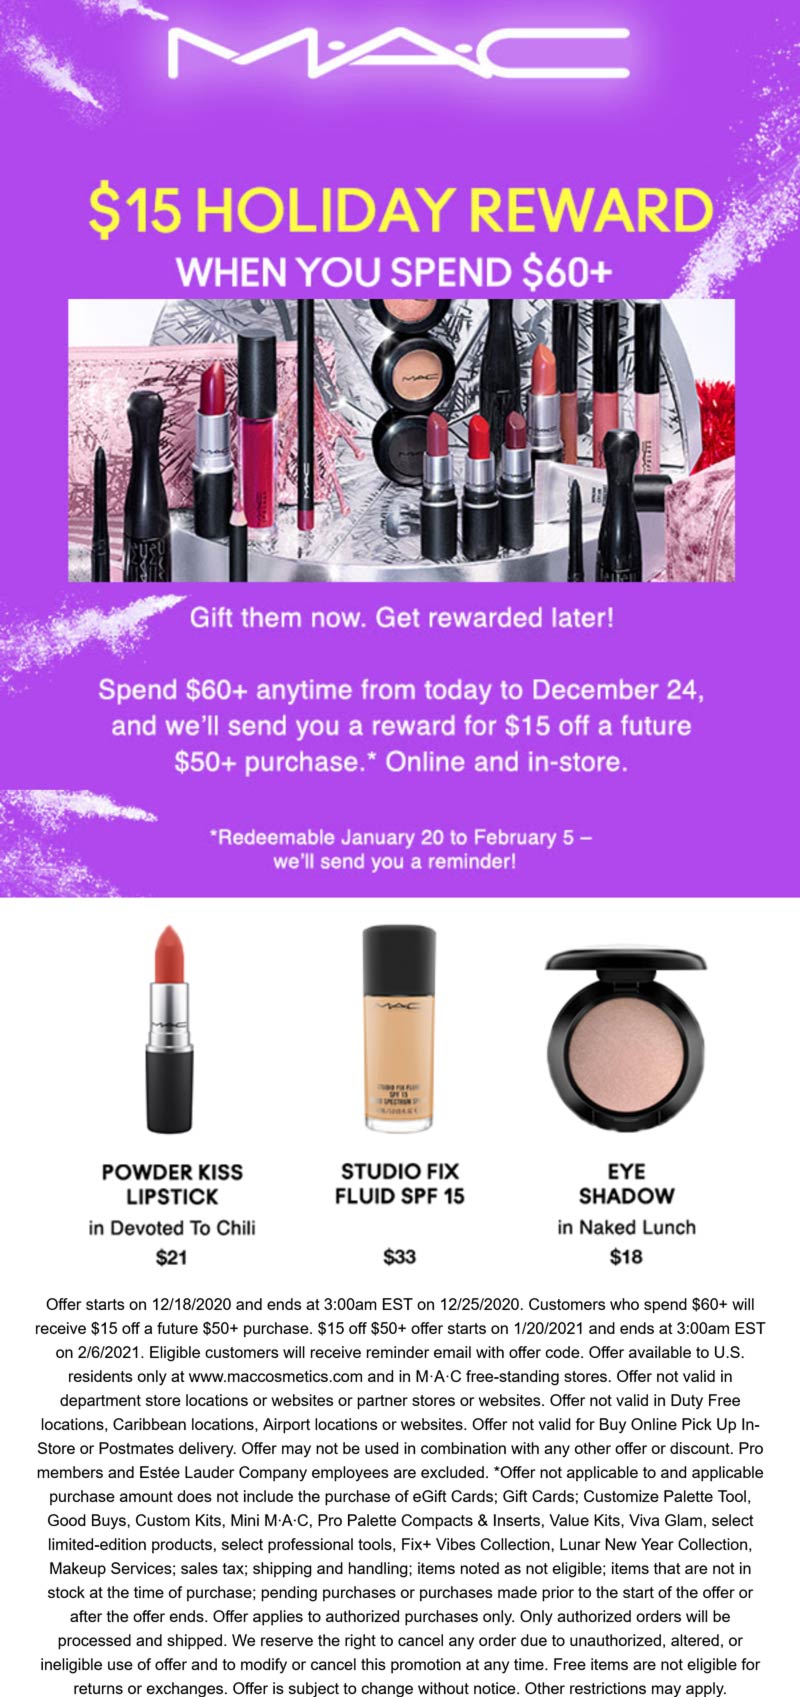 15 followup discount with 60 spent today at MAC cosmetics mac The